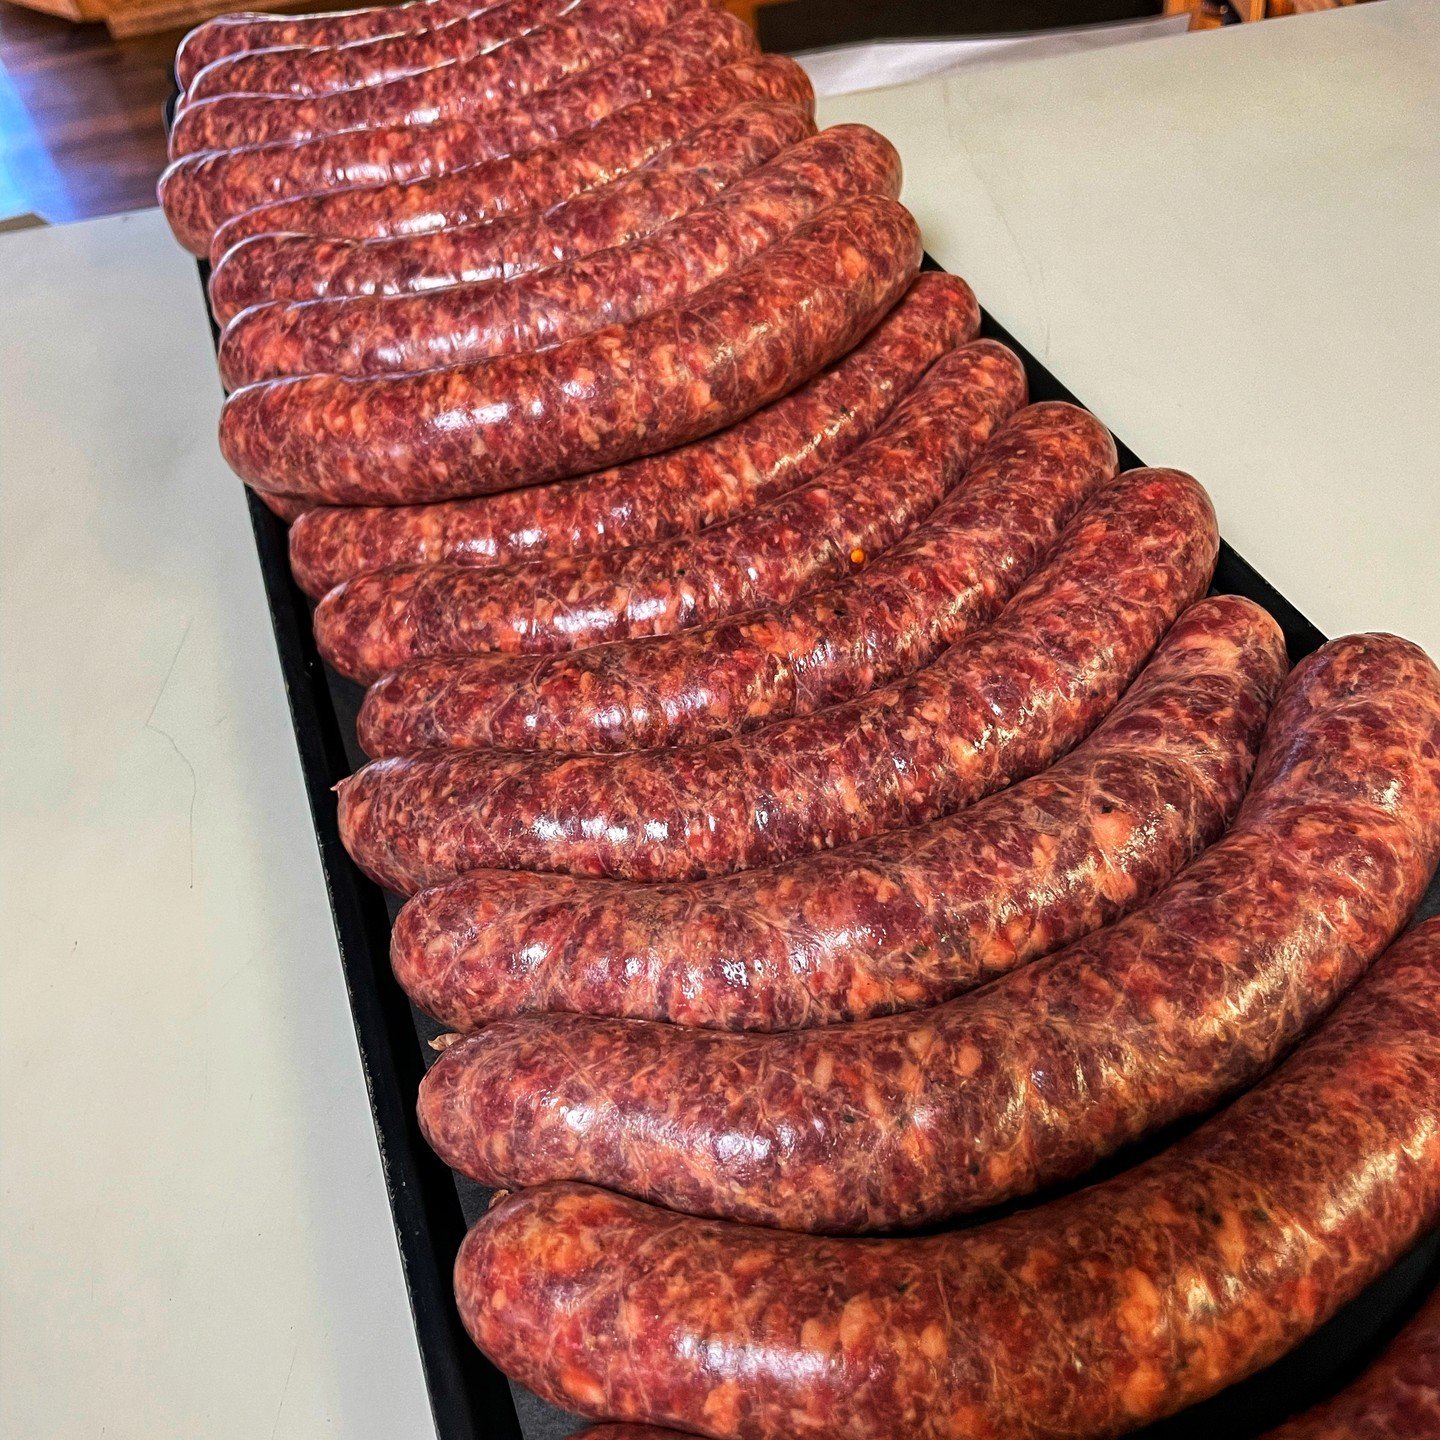 SAUSAGE PASSPORT SPECIAL- This week we&rsquo;re featuring a sausage we have offered, but it deserves a highlight. Elk Italian is full of all-natural elk and Berkshire pork, both raised antibiotic-free too ;)
Excellent choice for the grill, or to add 